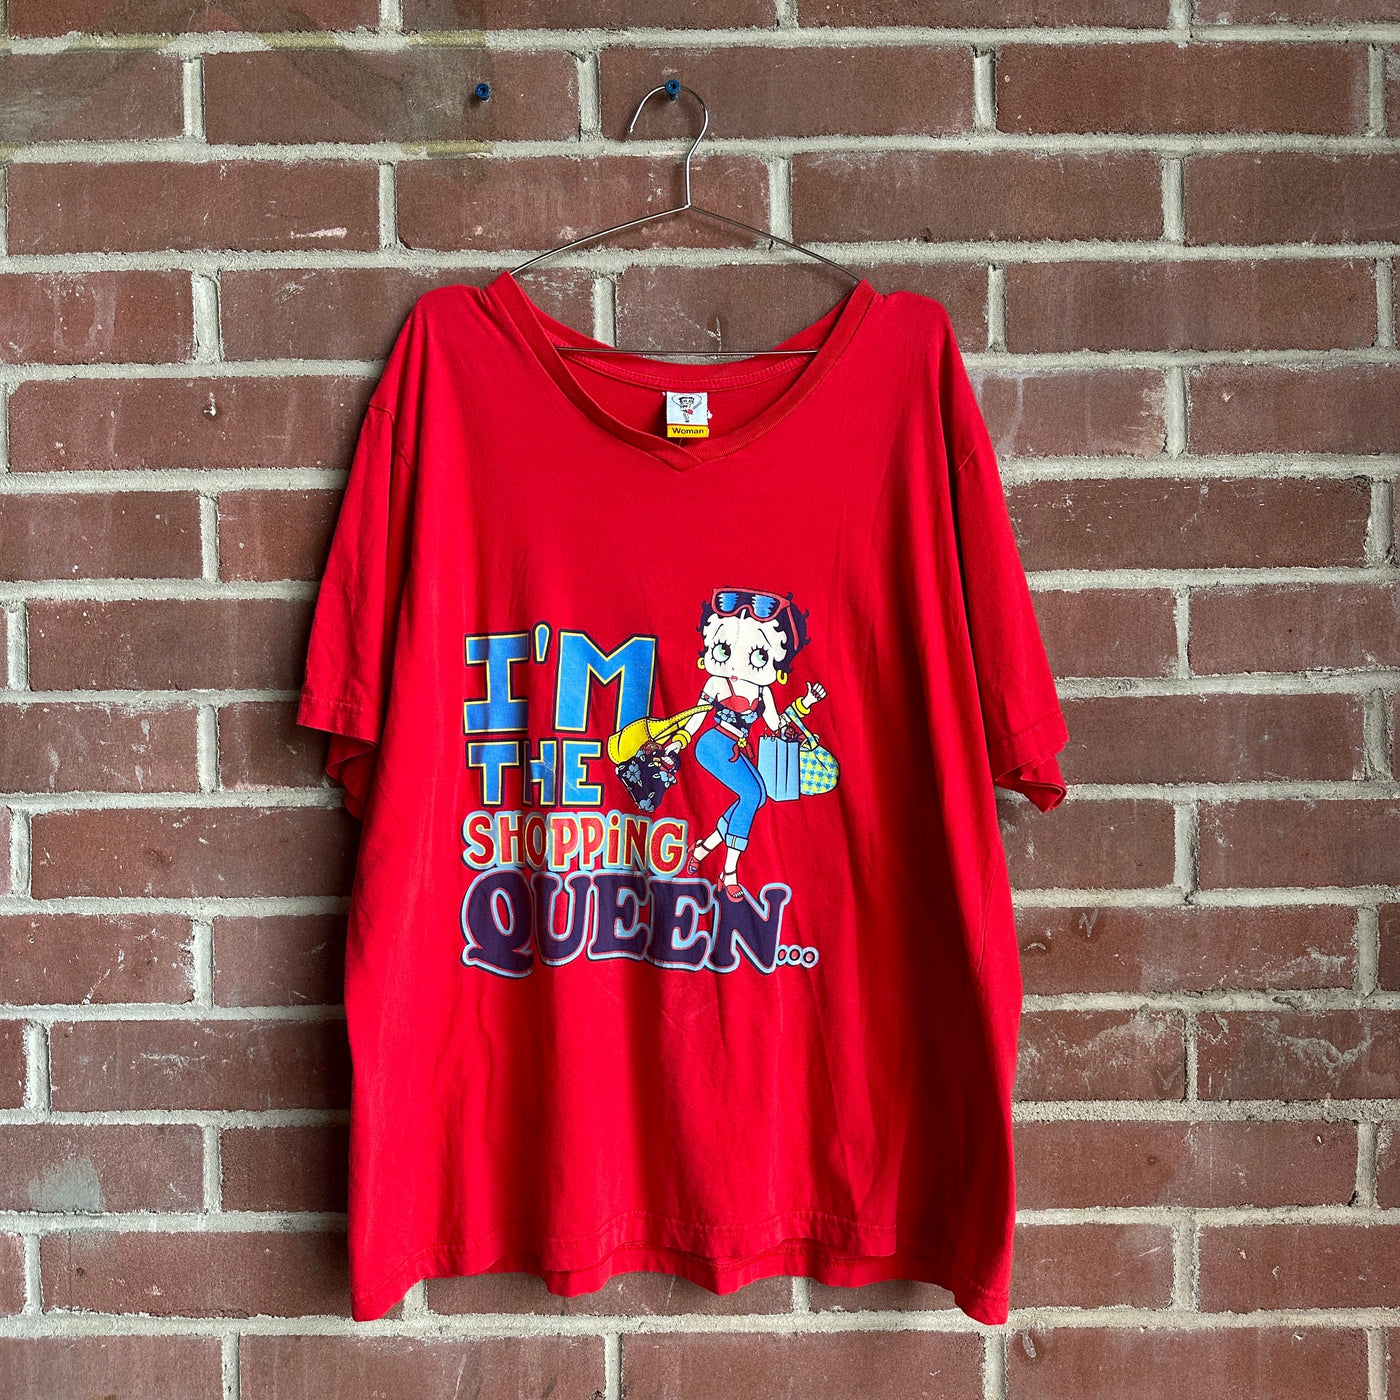 2002 Red Betty Boop “I’m the Shopping Queen” V-Neck T-Shirt